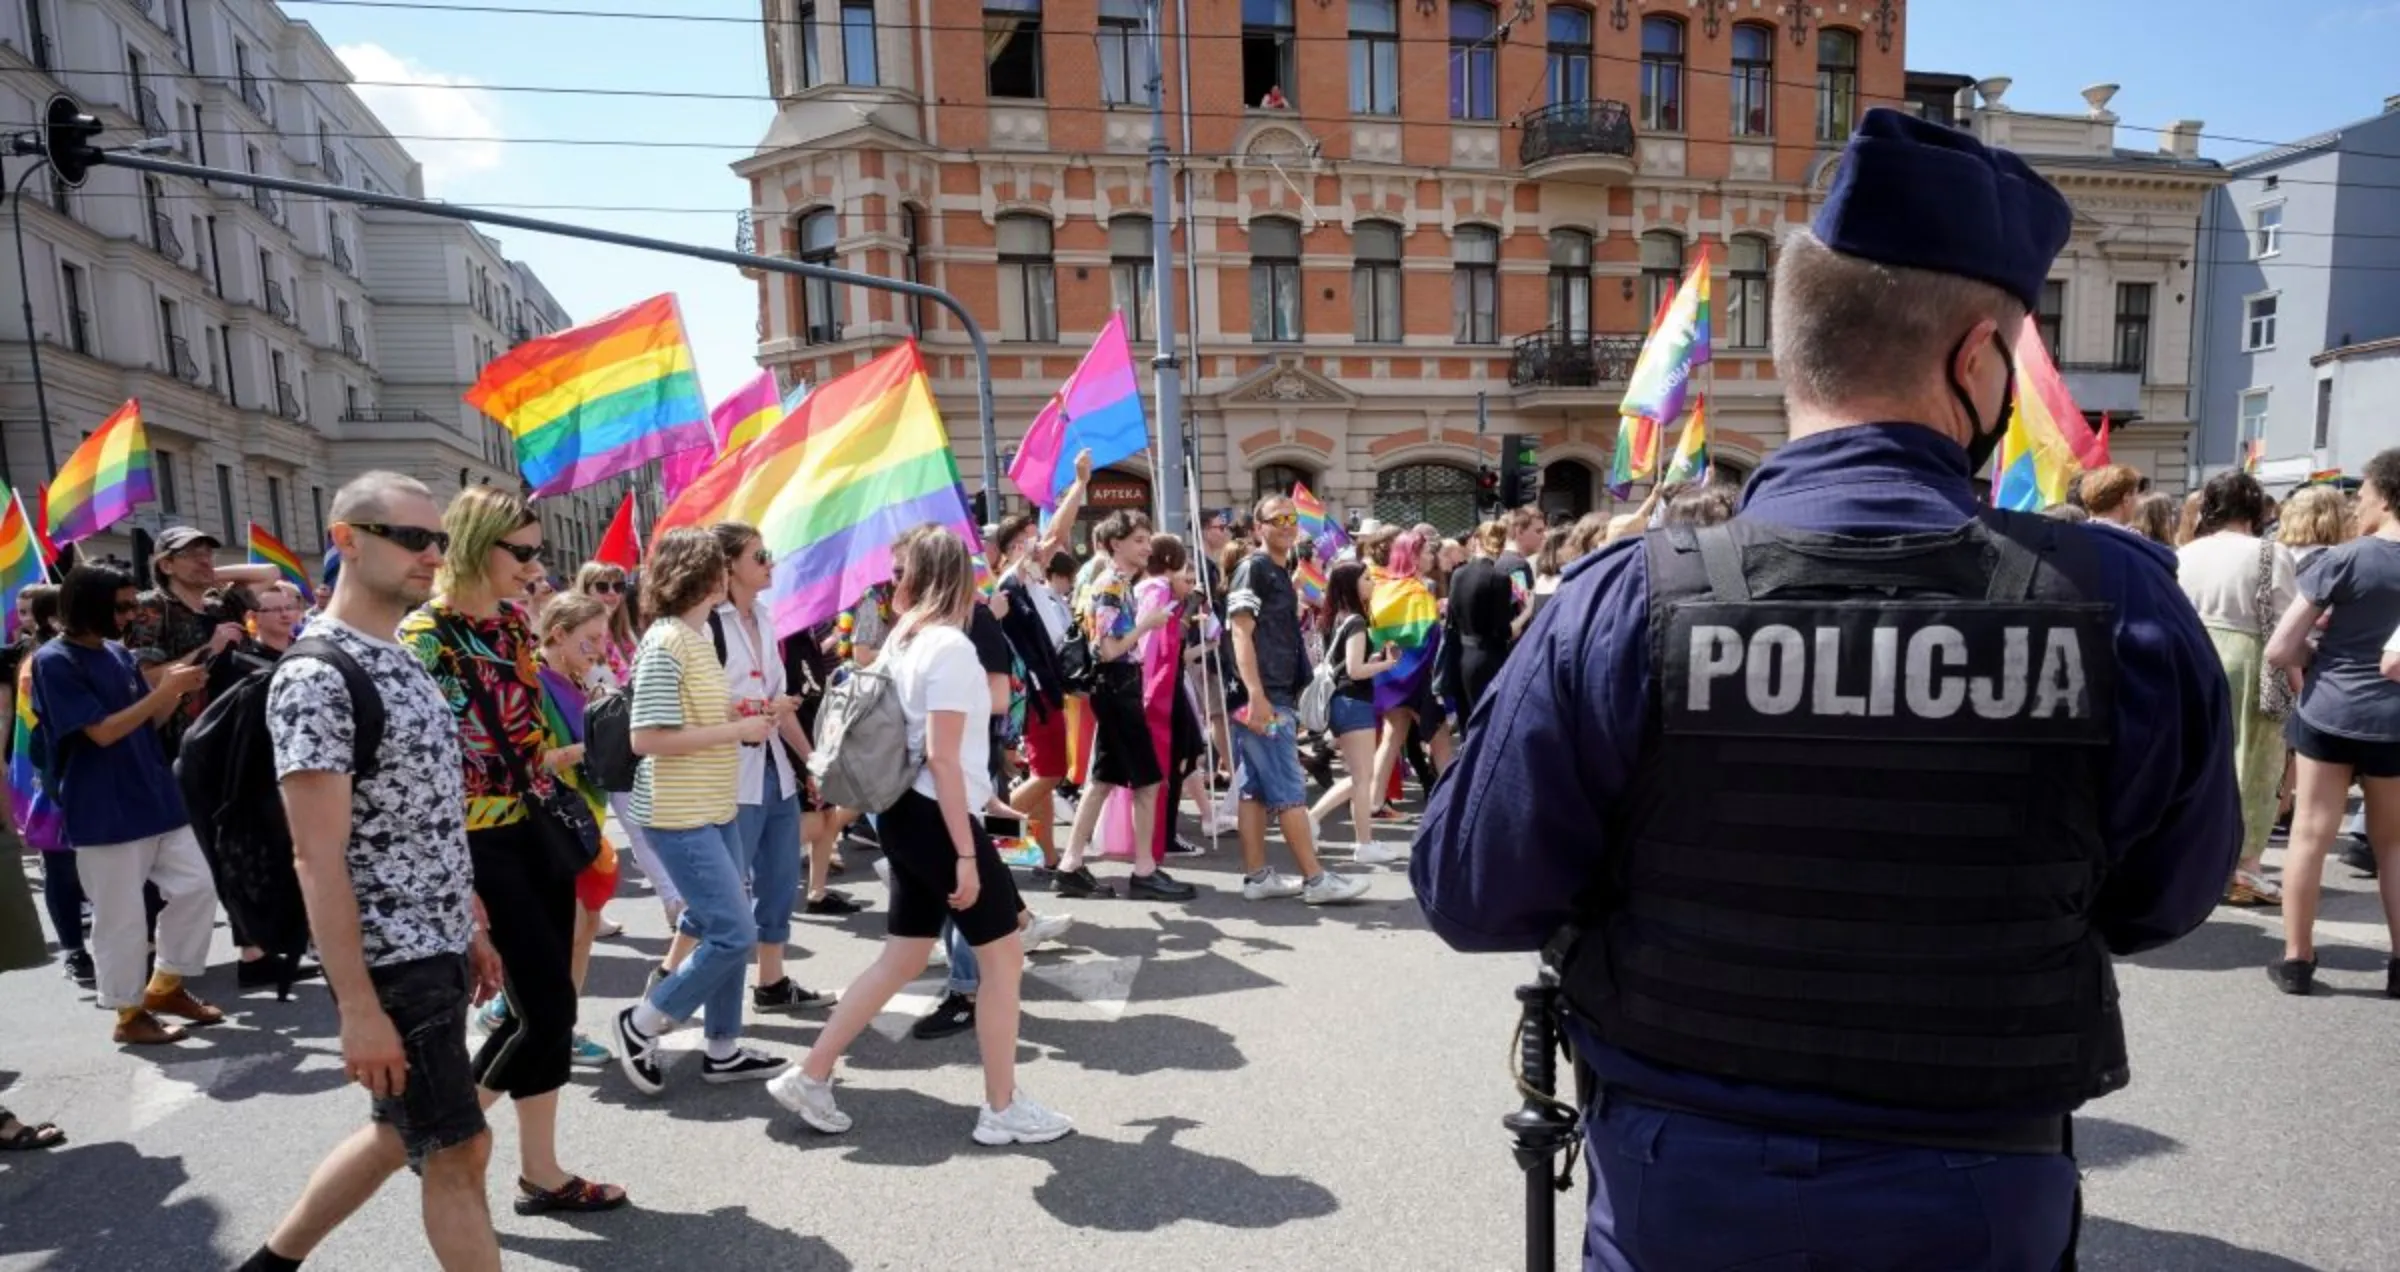 Demonstrators take part in the Equality March in support of the LGBT community, in Lodz, Poland June 26, 2021. Marcin Stepien/Agencja Gazeta via REUTERS